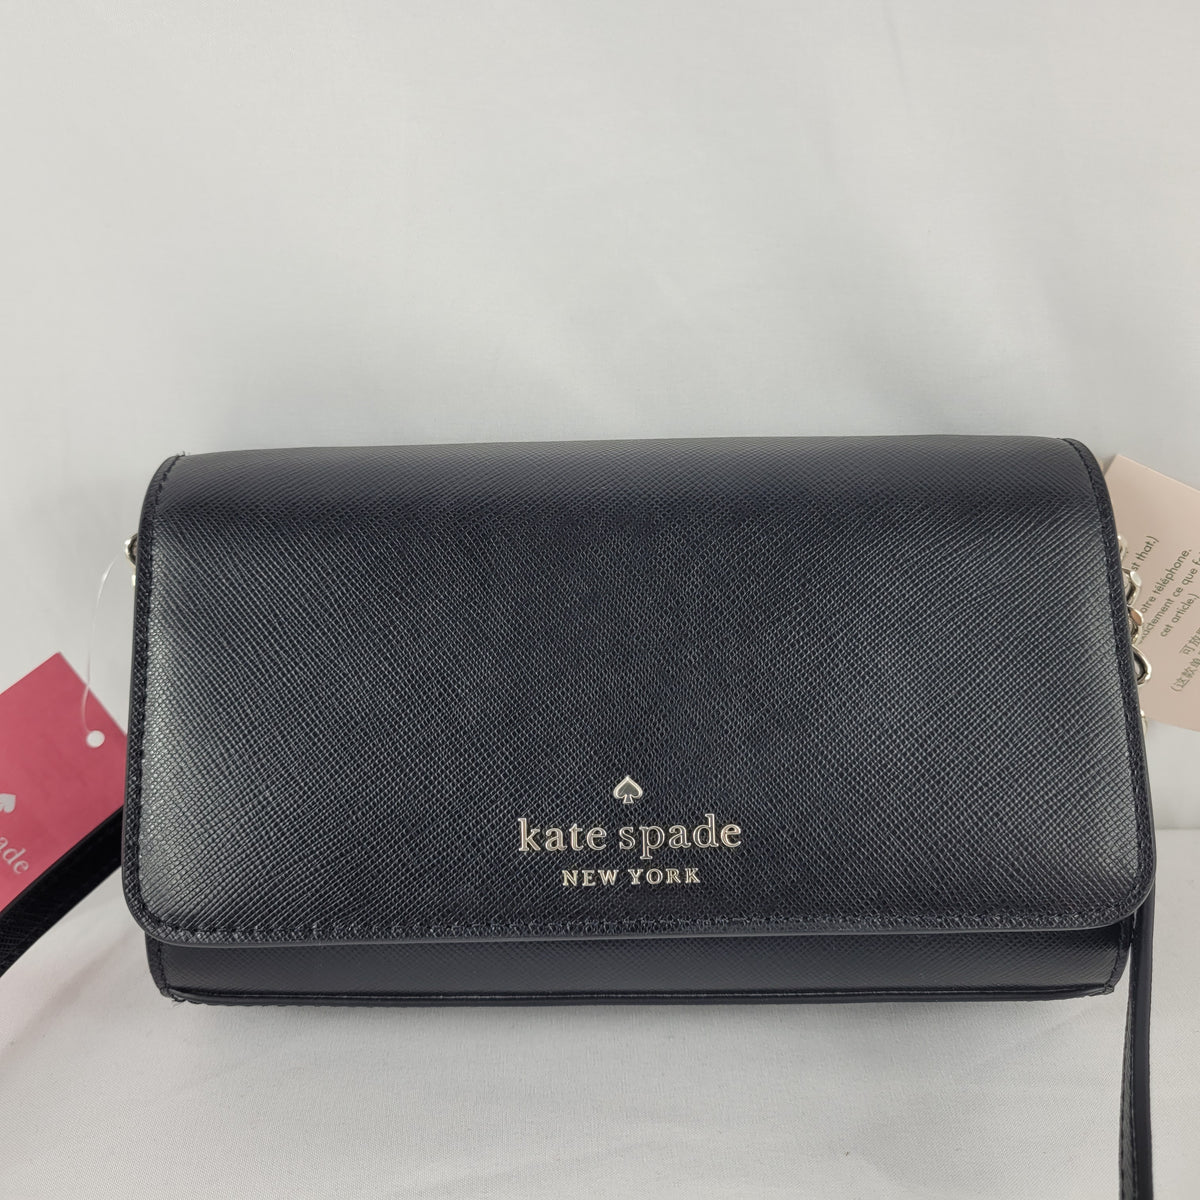 Pre-owned Kate Spade Staci Small Flap Crossbody Saffiano Leather Wlr00632  $239